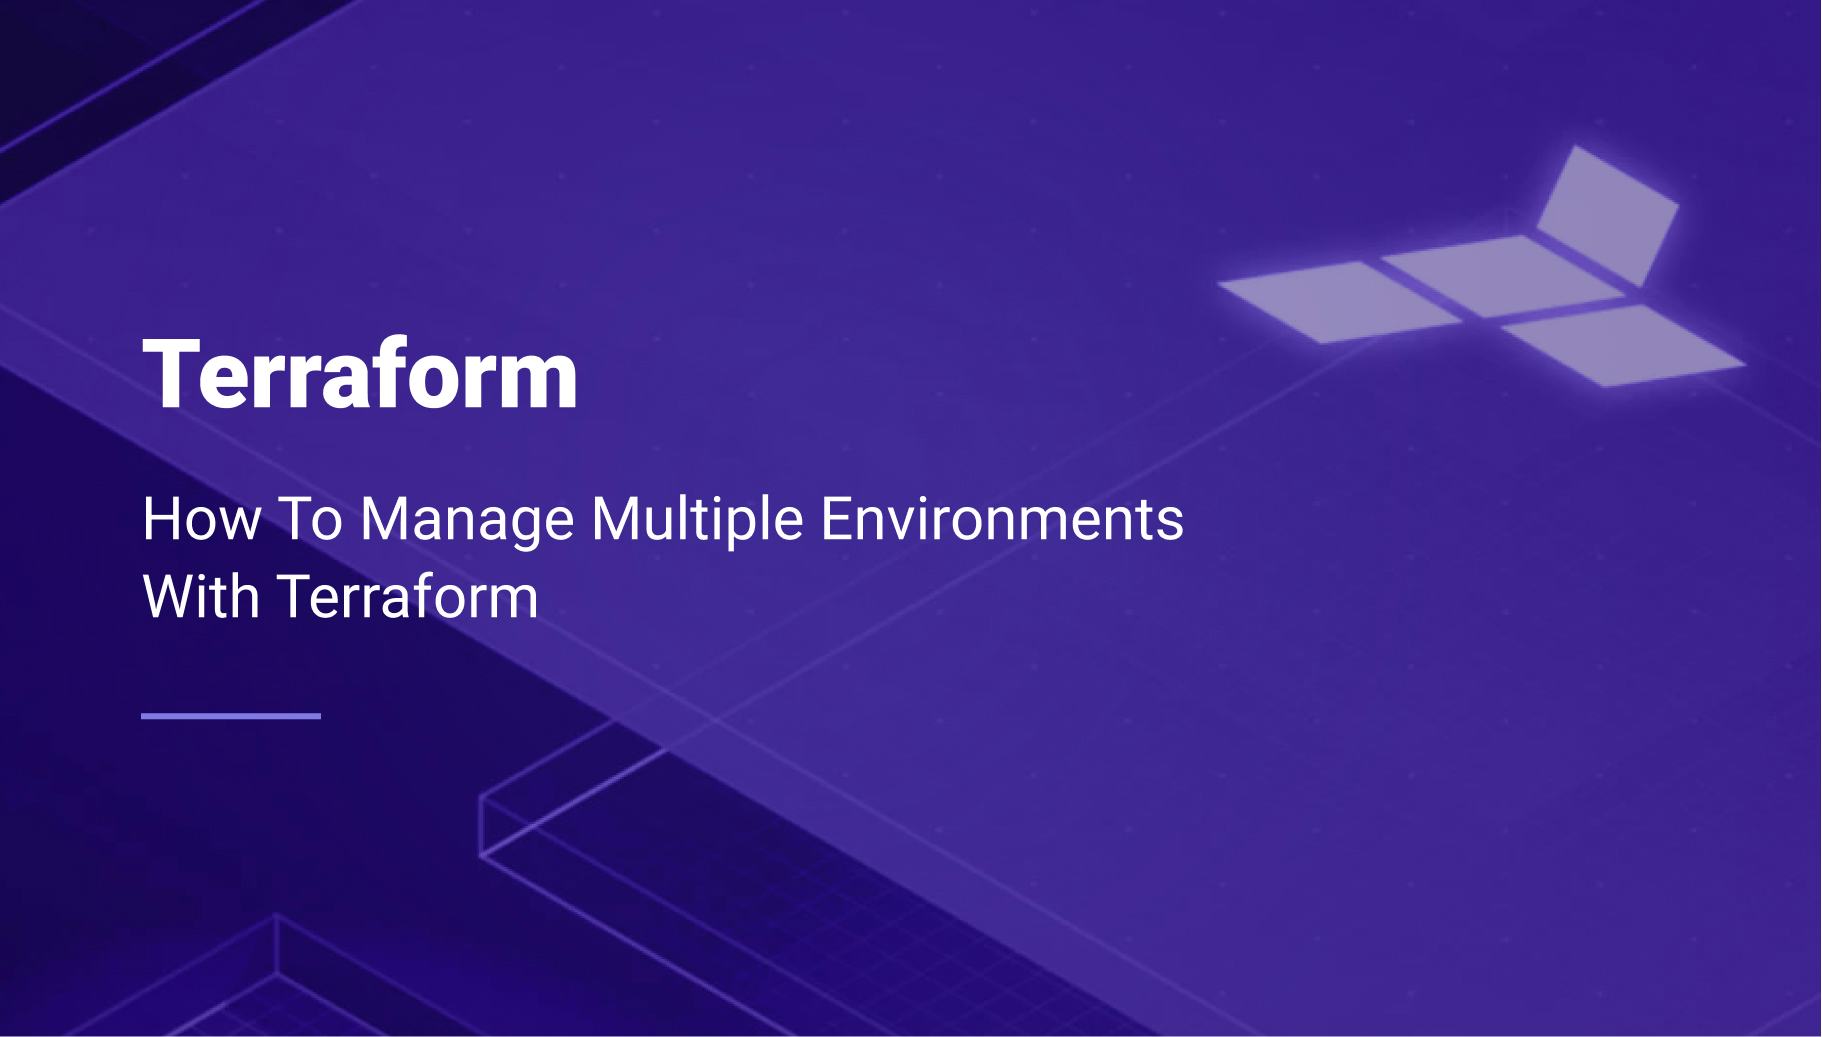 How To Manage Multiple Environments With Terraform